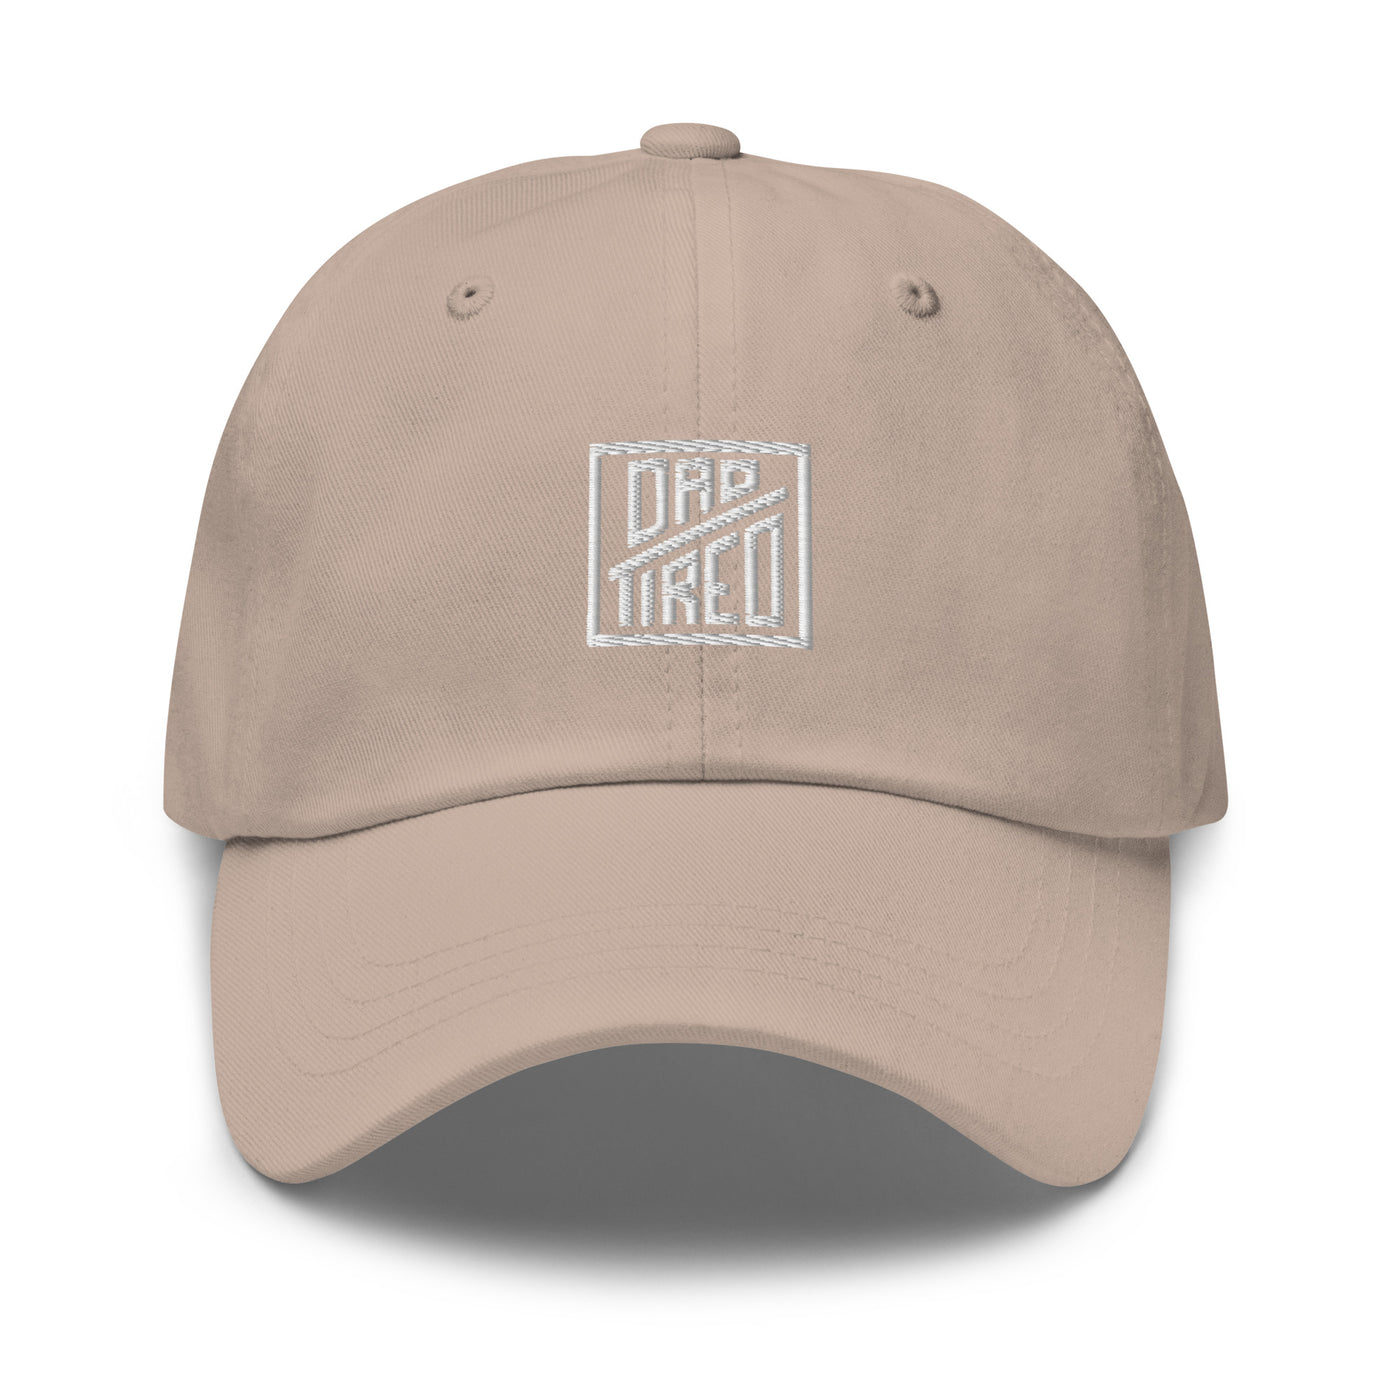 The "Classic" Dad Hat